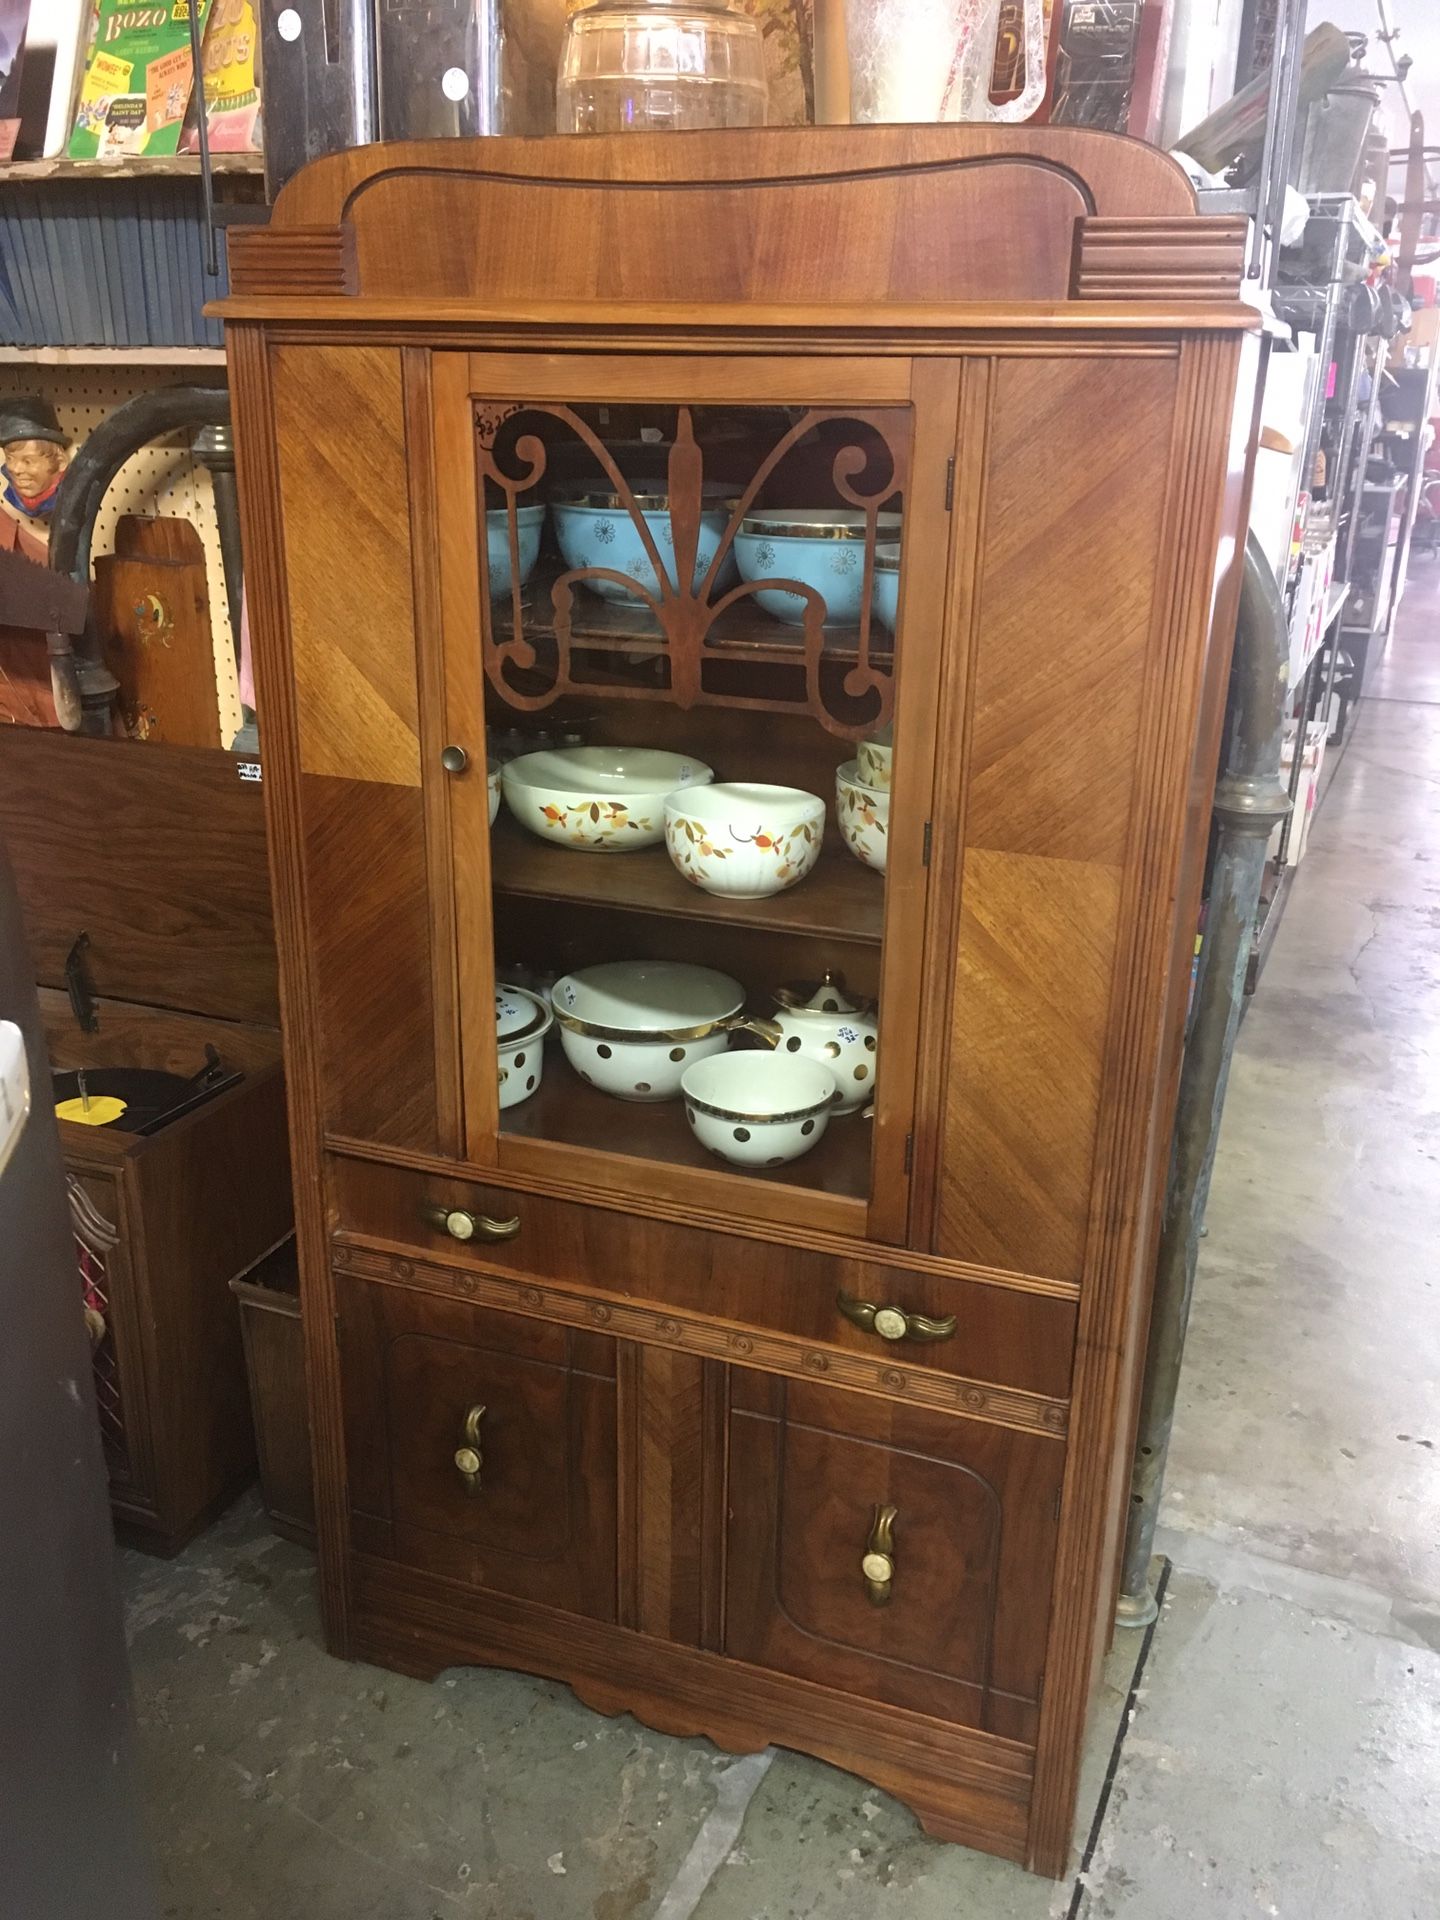 Deco china cabinet great condition